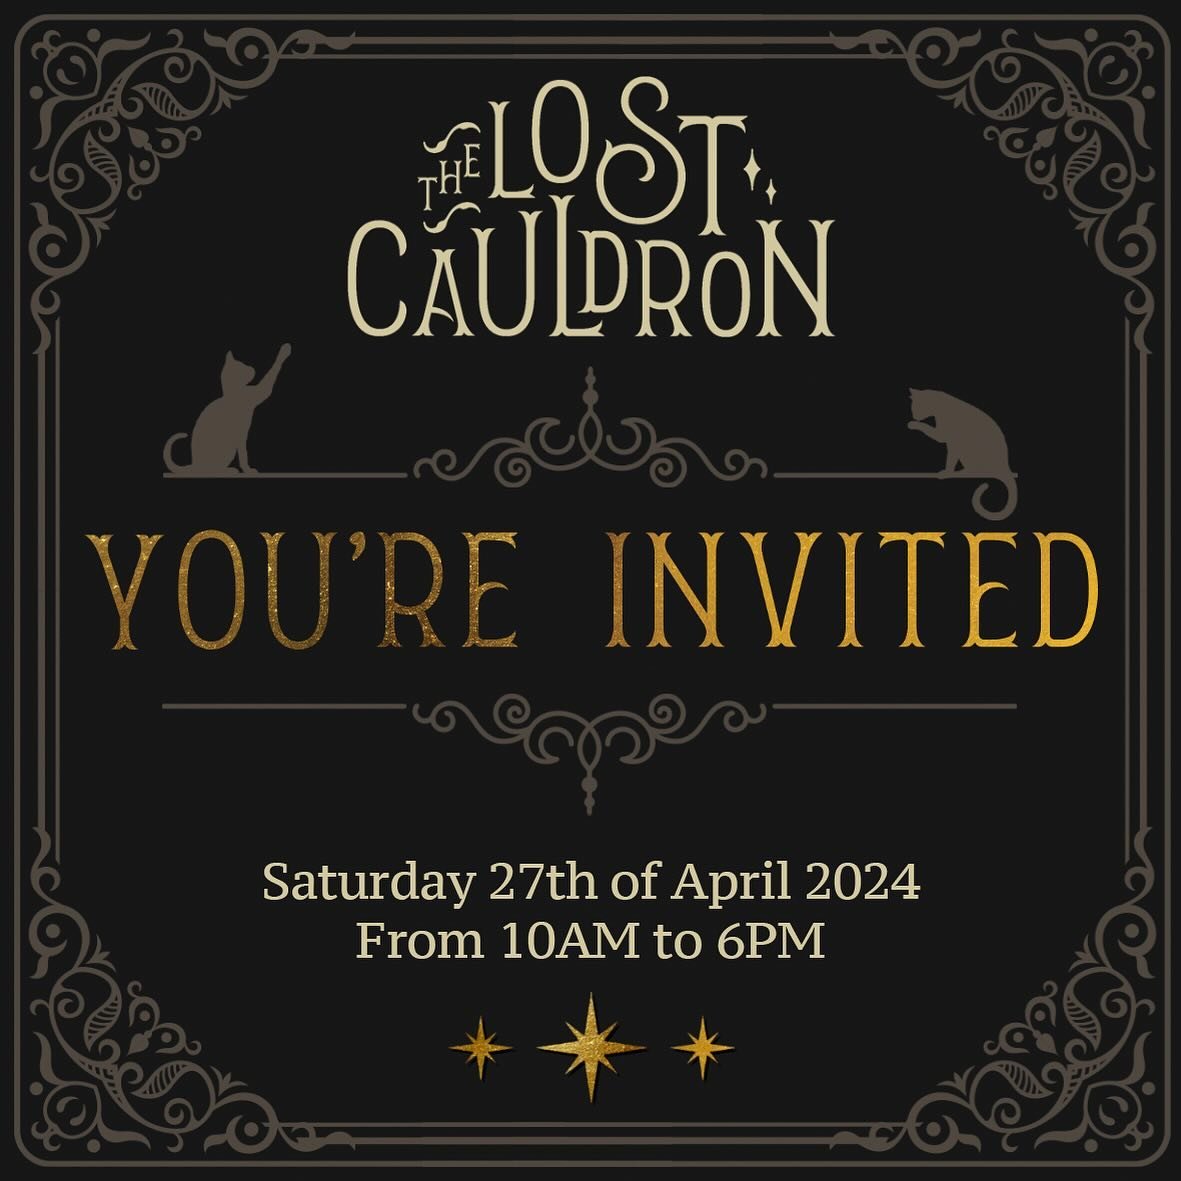 After months of casting spells, we are thrilled to announce that the moment you&rsquo;ve all been waiting for is almost here! 🗝️✨

The Lost Cauldron will open its doors to the public for the first time on Saturday 27th April, 2024, from 10AM to 6PM!